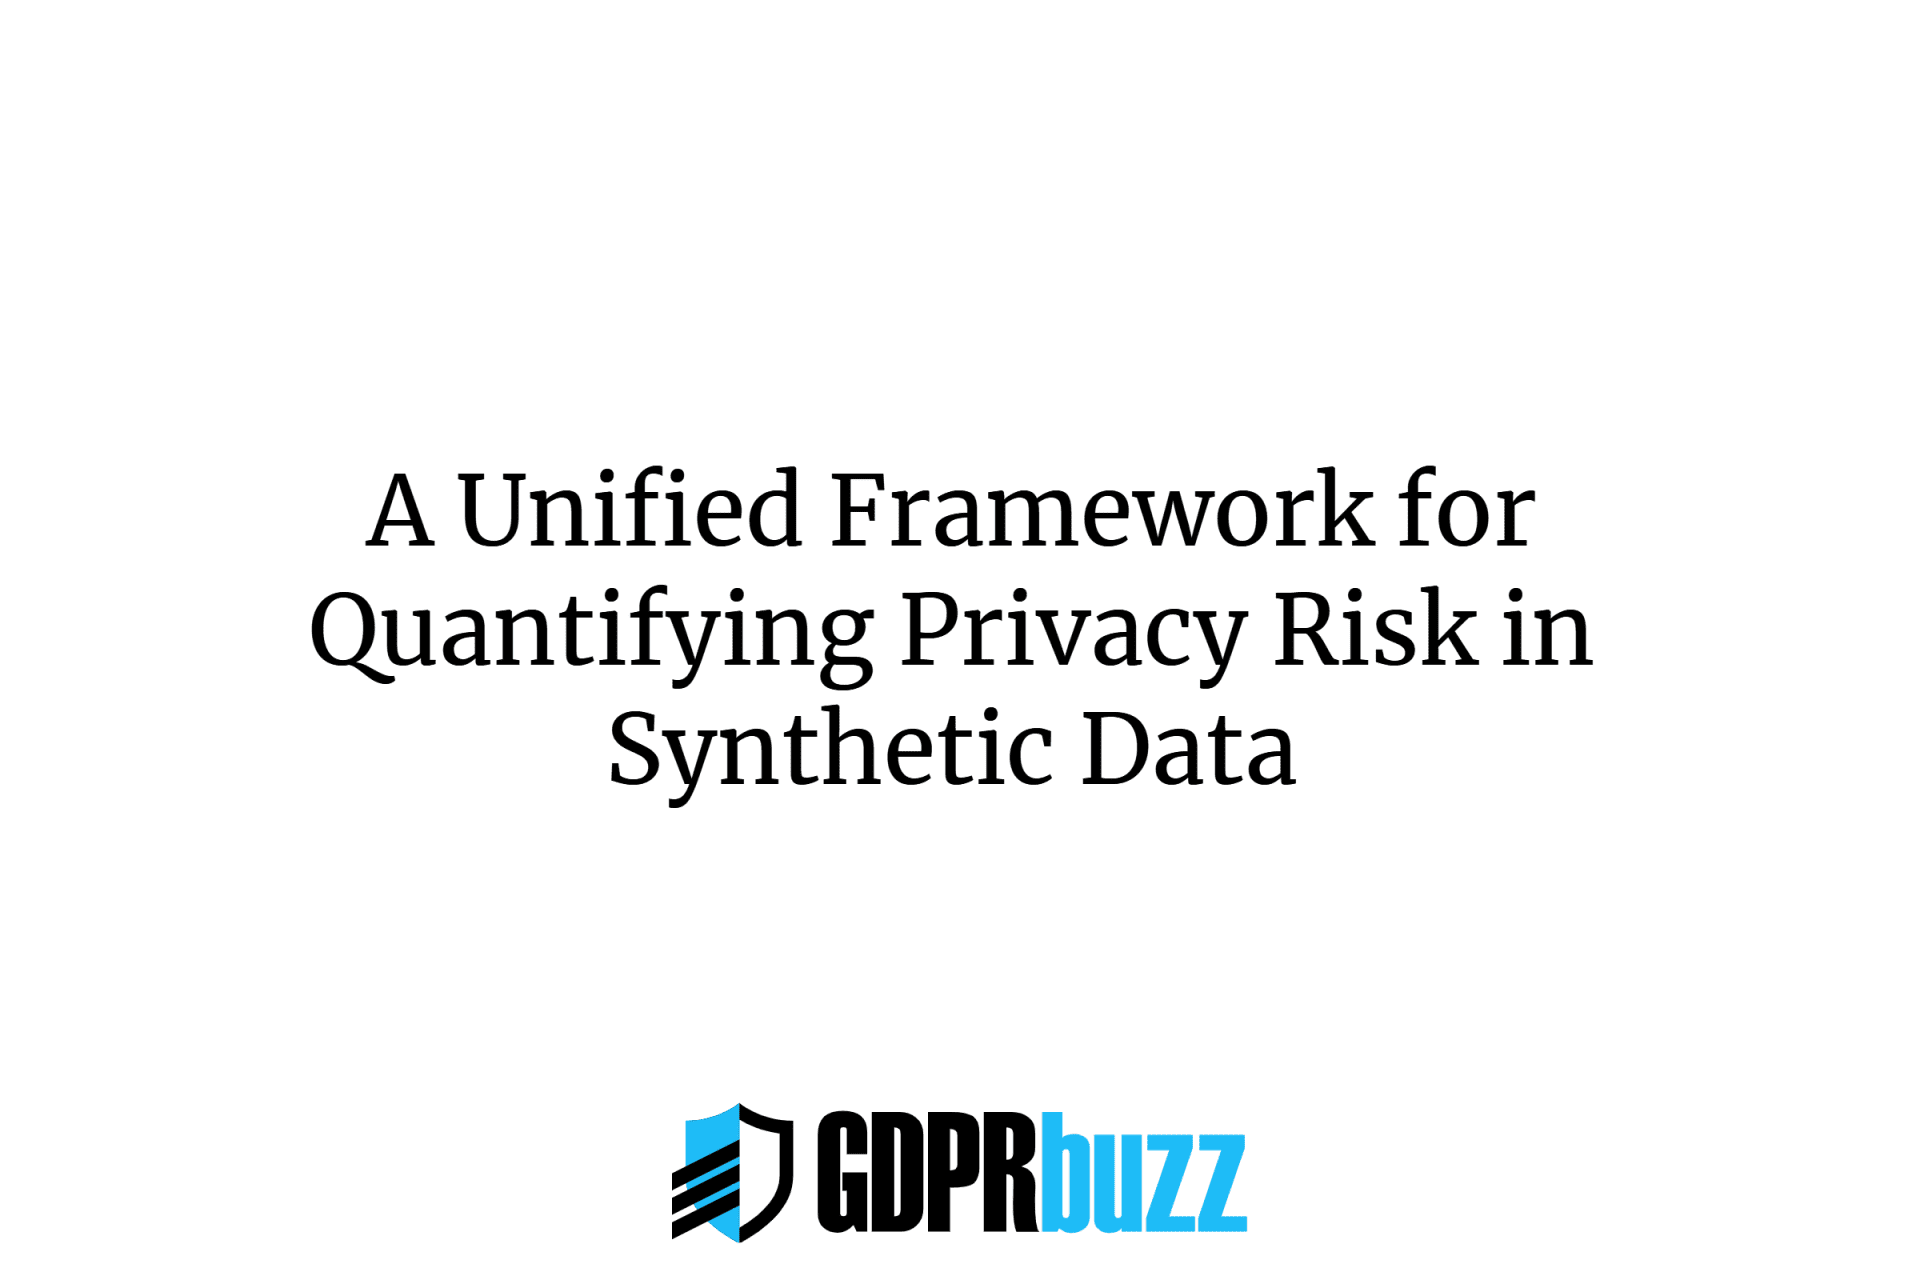 A unified framework for quantifyingprivacy risk in synthetic data